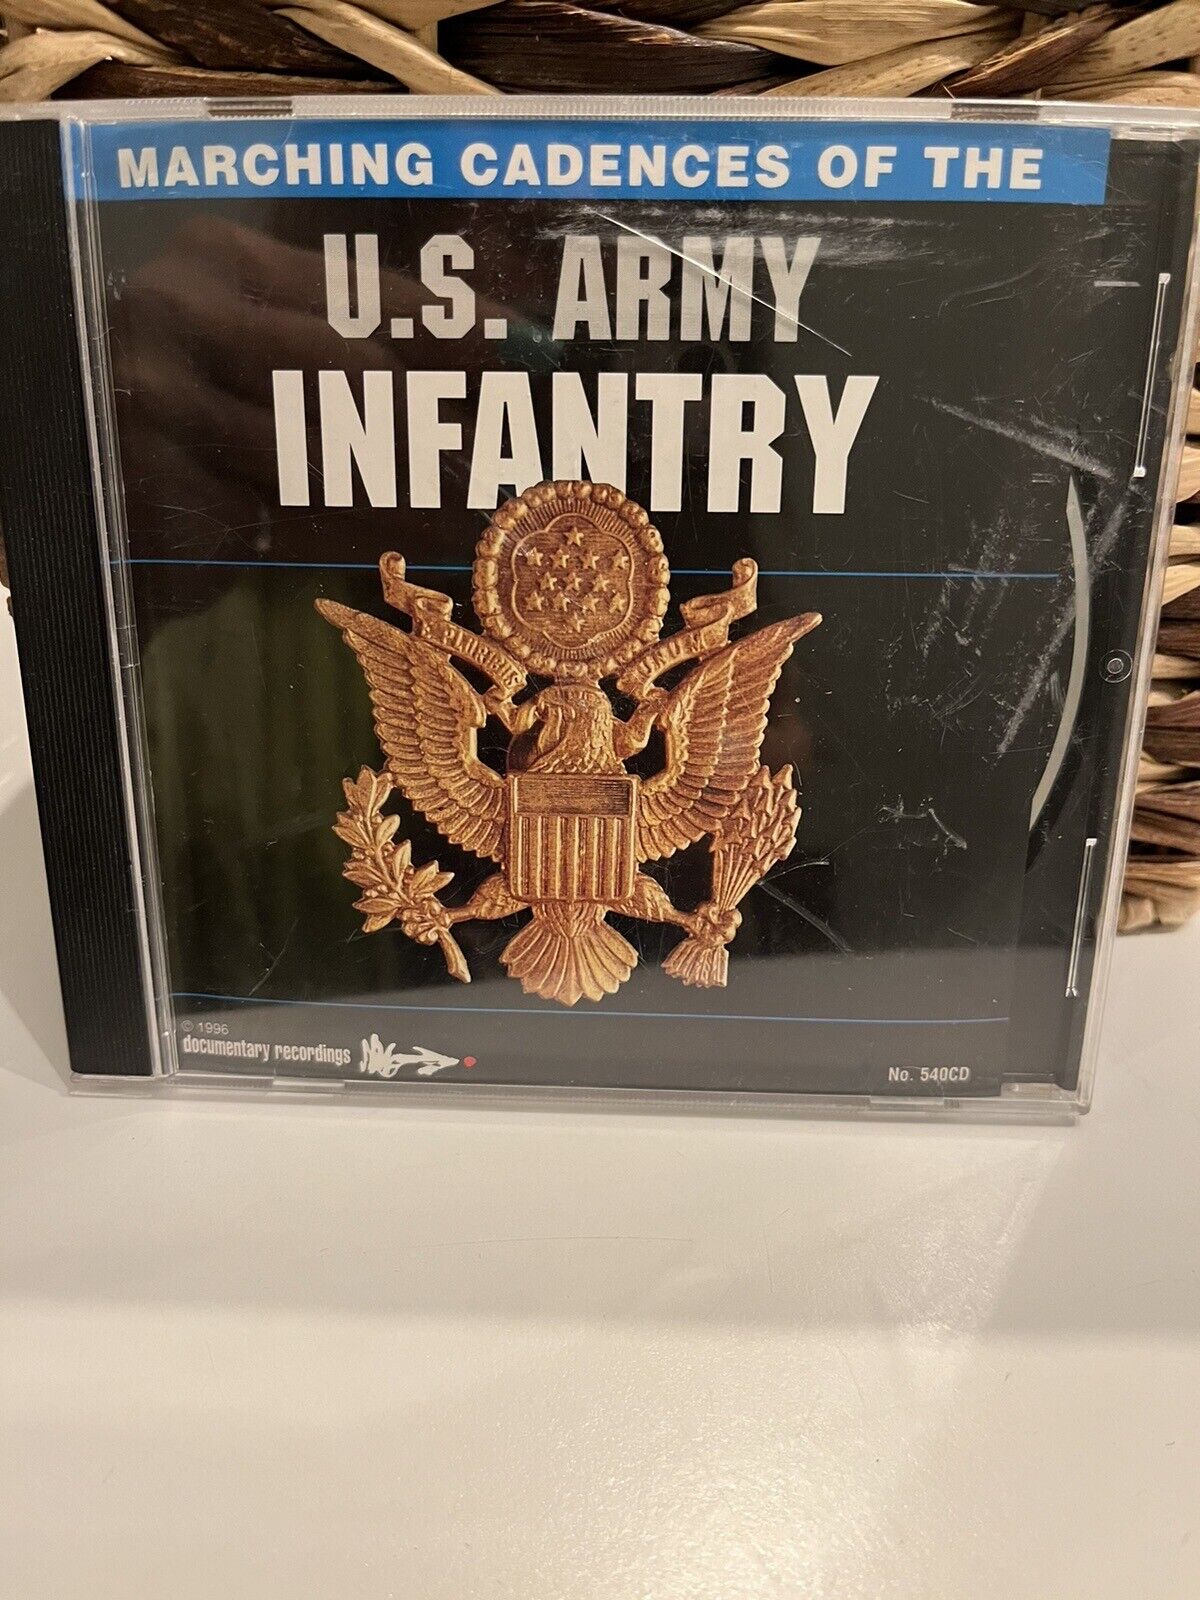 U S ARMY INFANTRY - Marching Cadences Of The U.s. Army Infantry - CD - Super